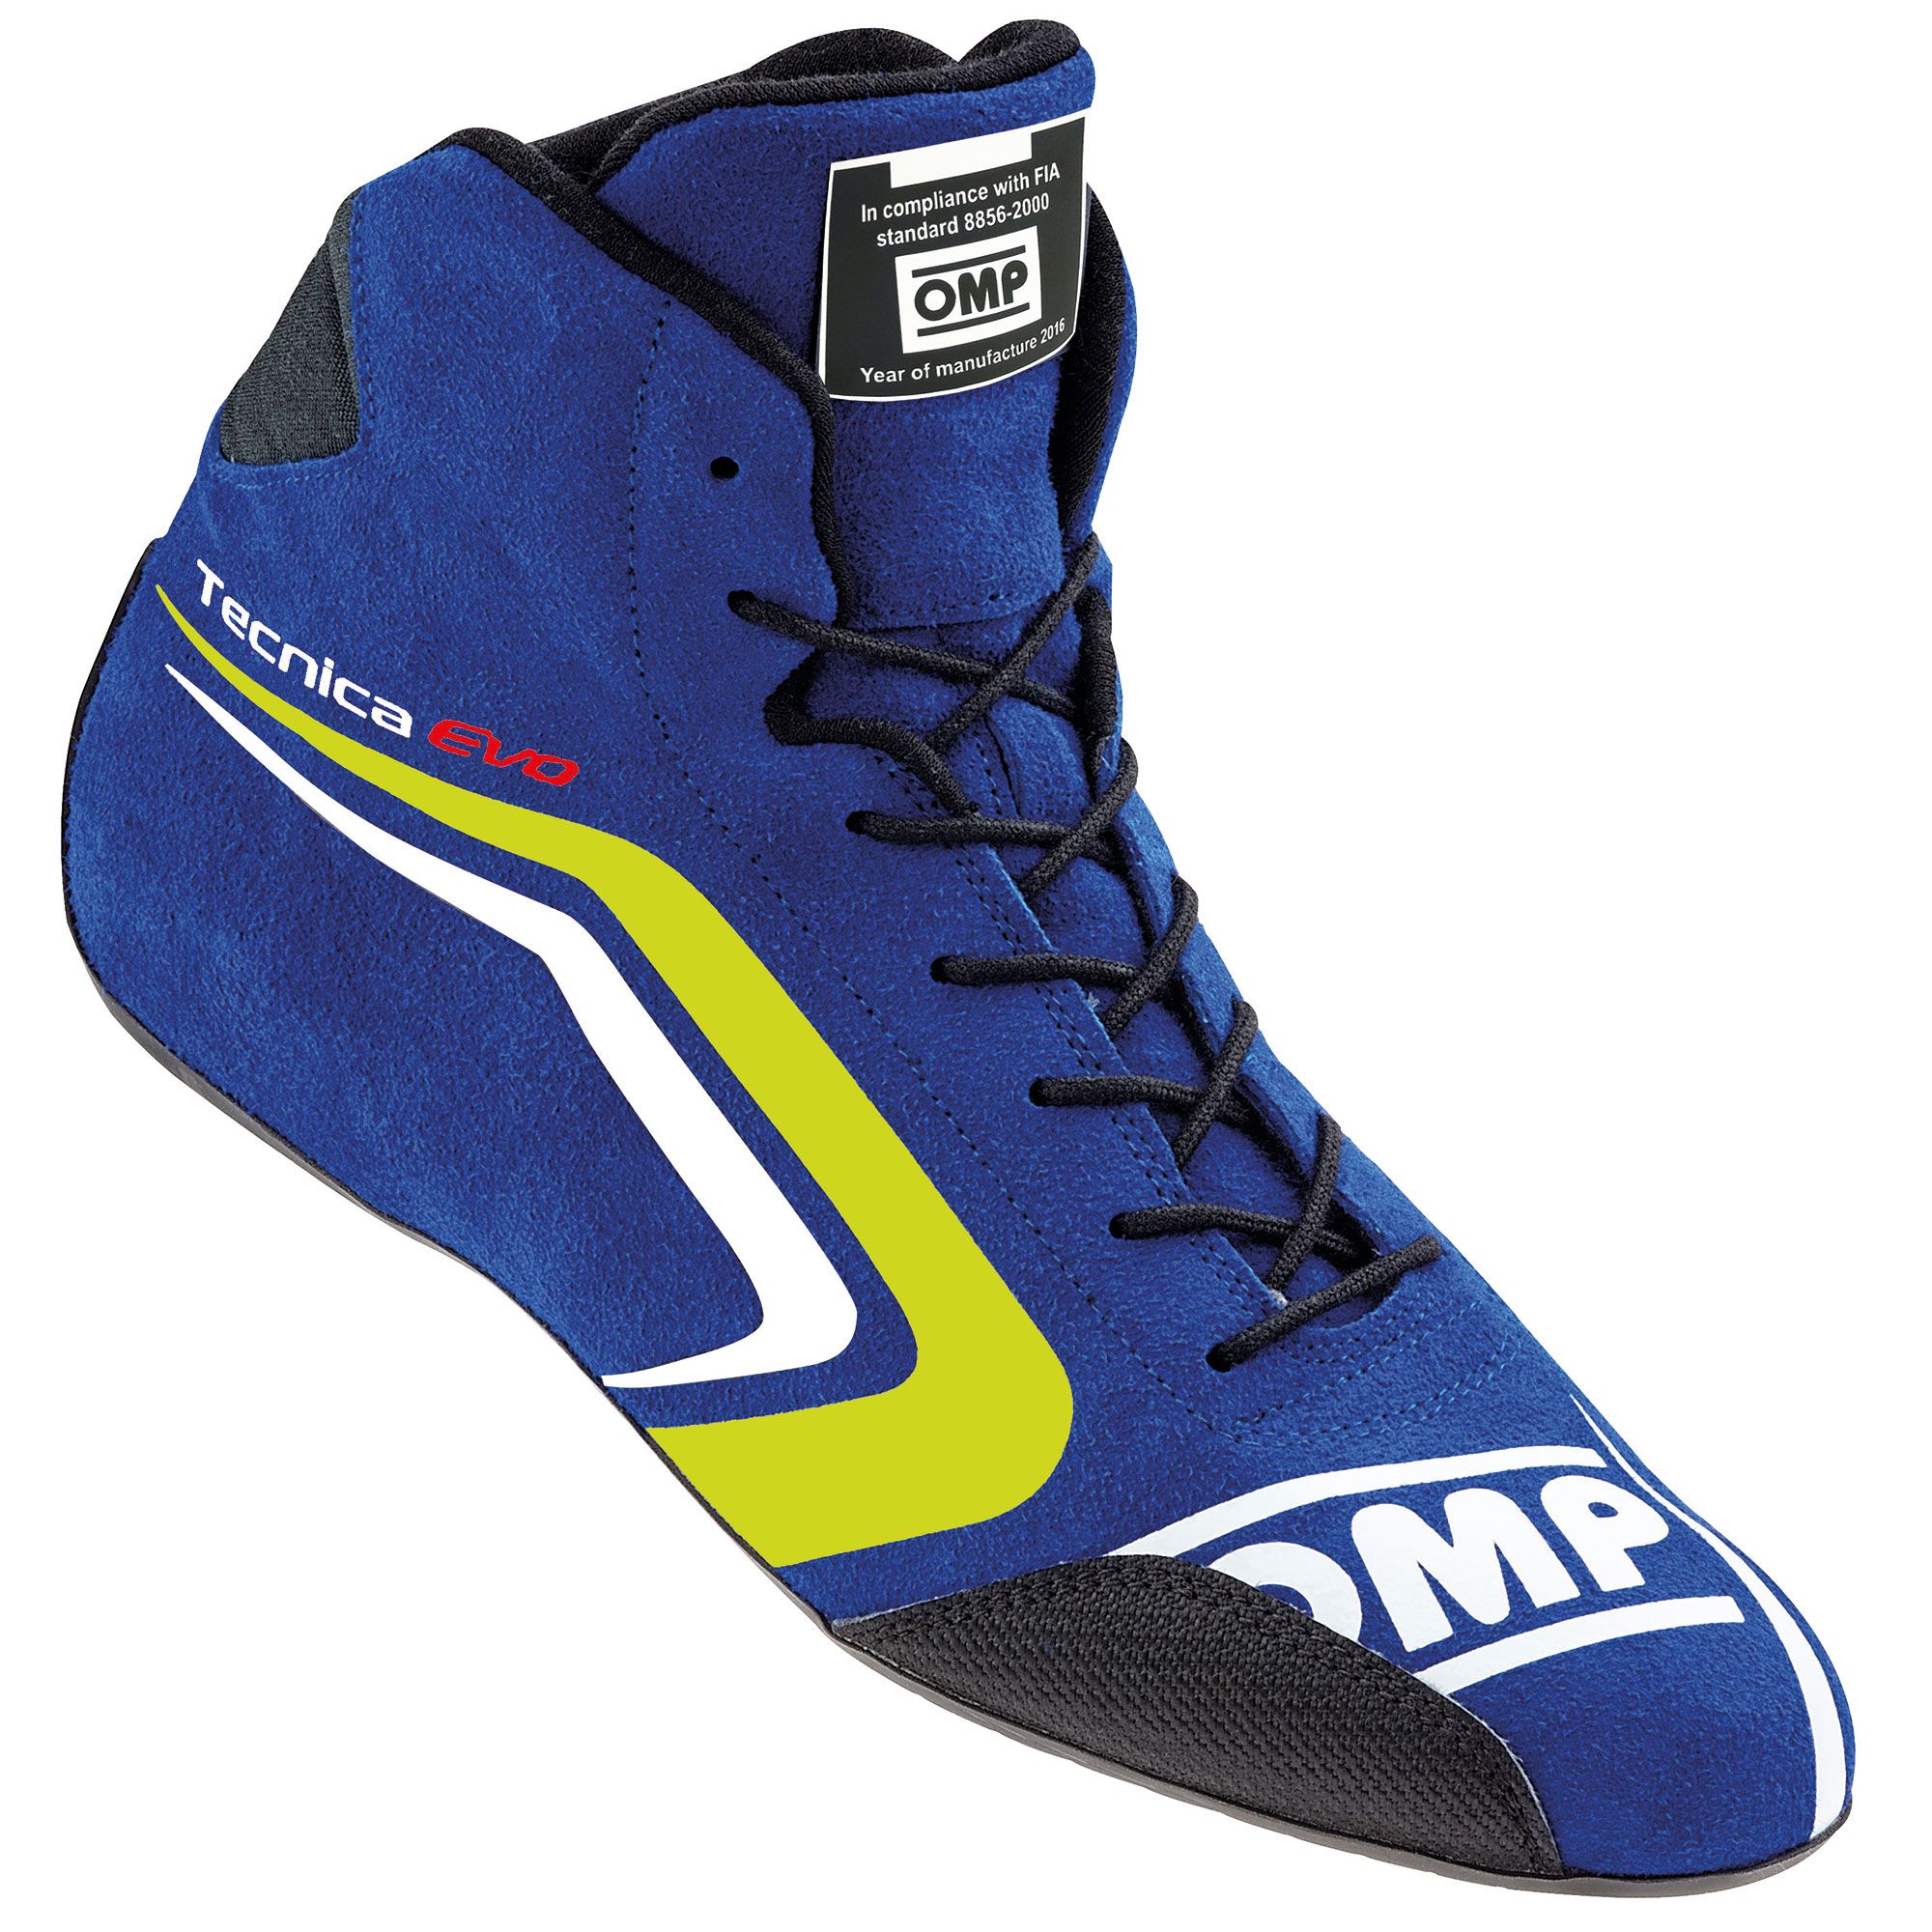 fia approved race boots